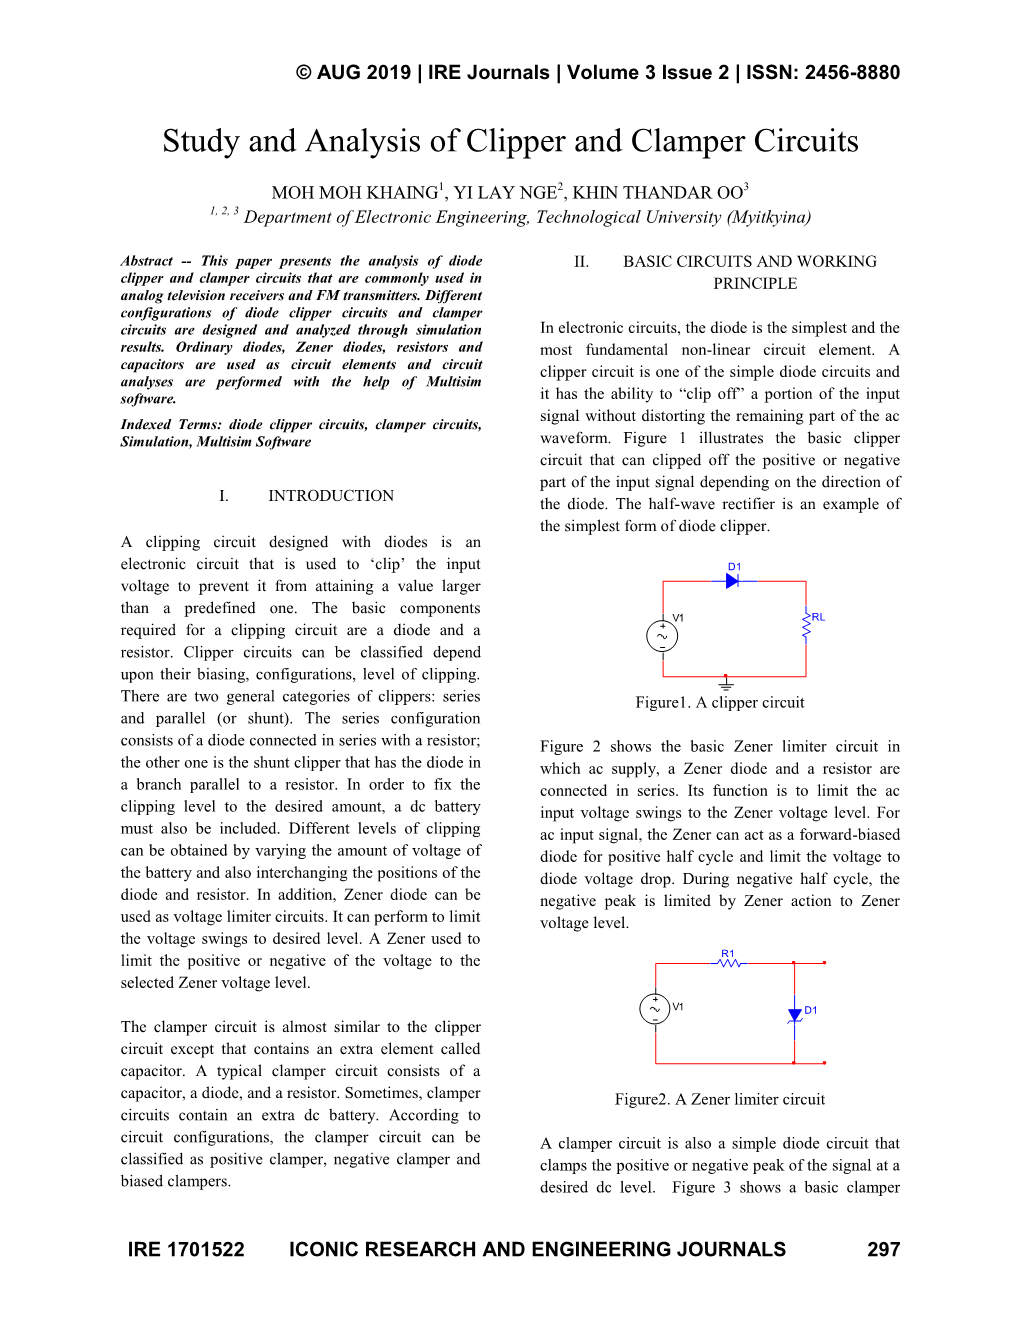 Study and Analysis of Clipper and Clamper Circuits